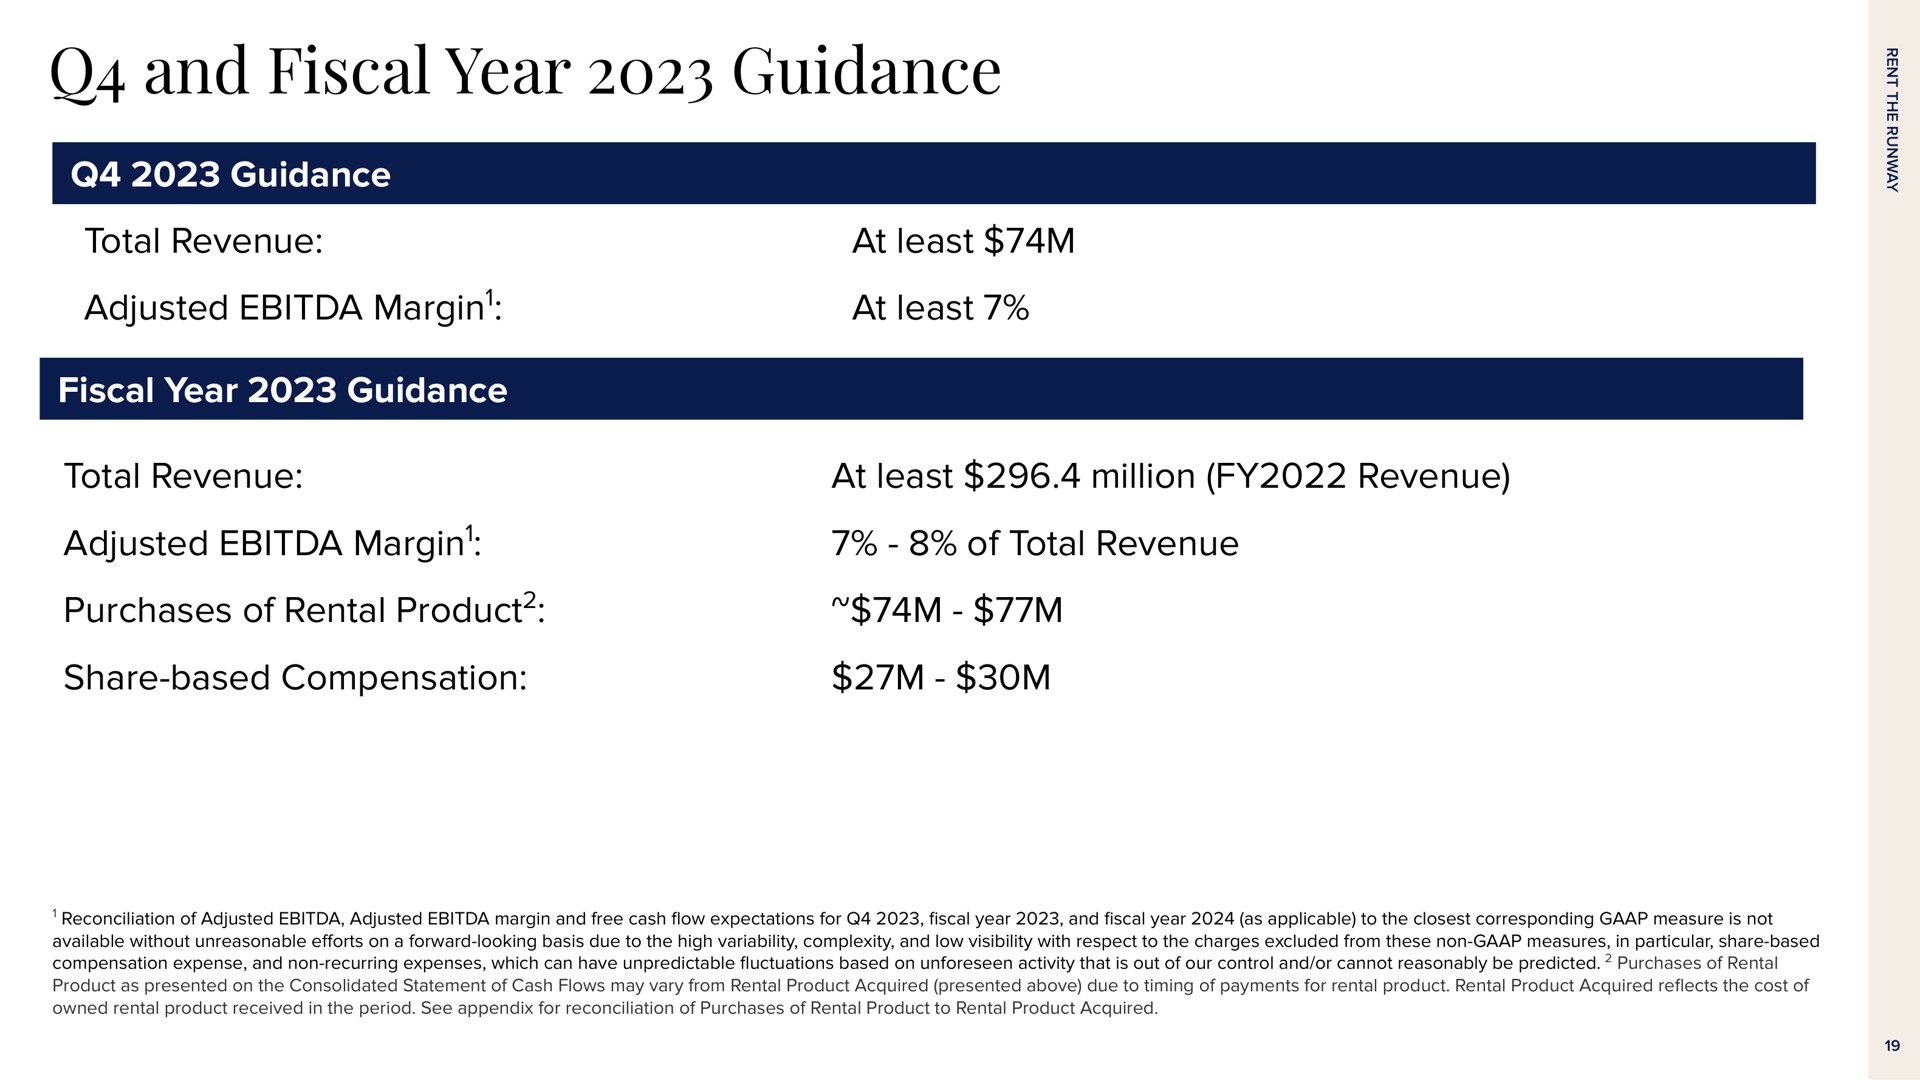 and fiscal year guidance guidance total revenue adjusted margin fiscal year guidance at least at least total revenue at least million revenue adjusted margin purchases of rental product share based compensation of total revenue | Rent The Runway